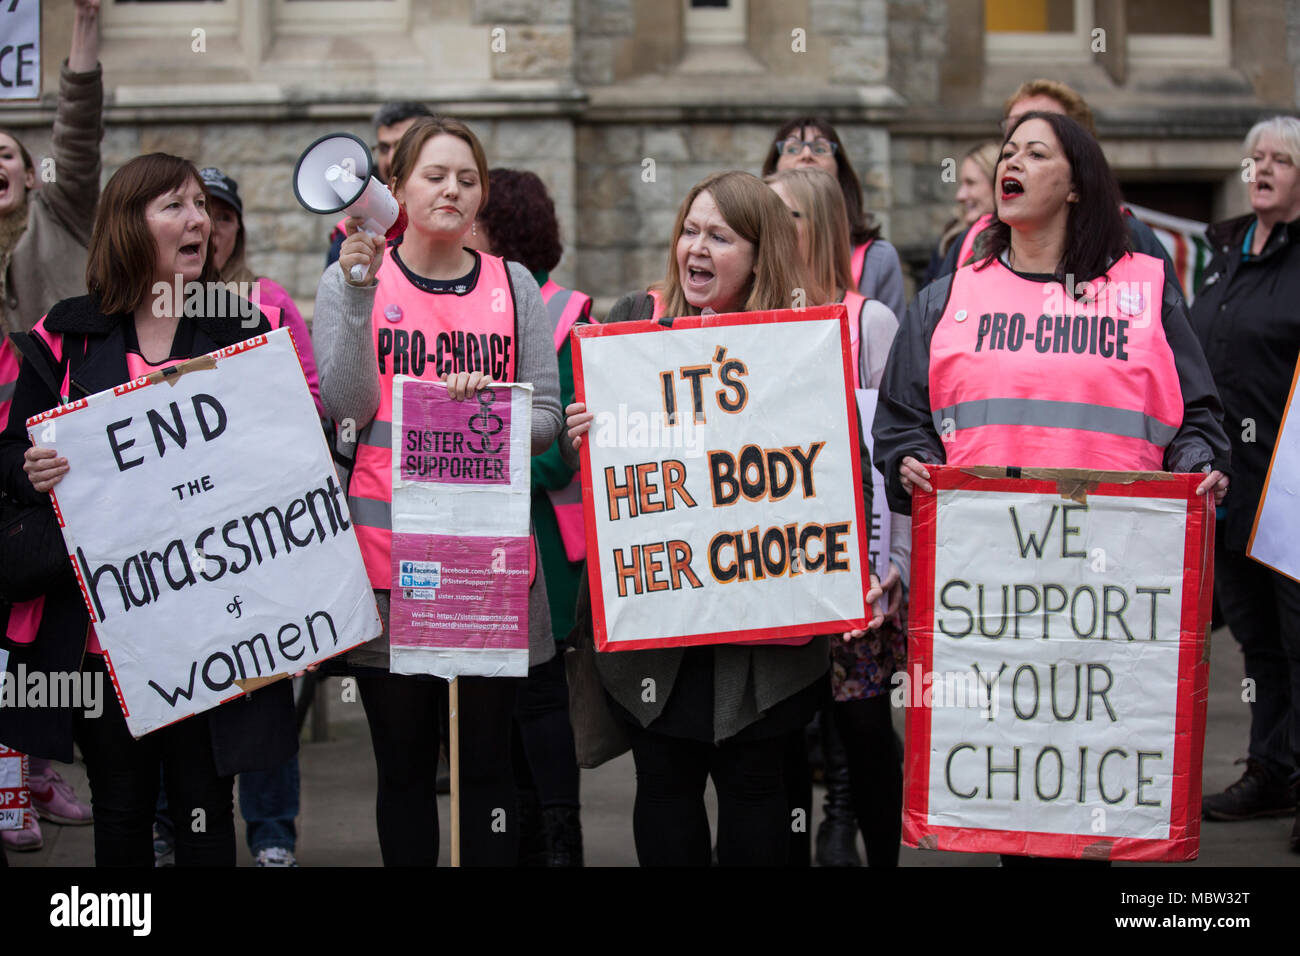 Pro-choice campaigners and Sister Supporters demonstrate outside Ealing Broadway Town Hall before the abortion buffer zone vote this week, London, UK Stock Photo